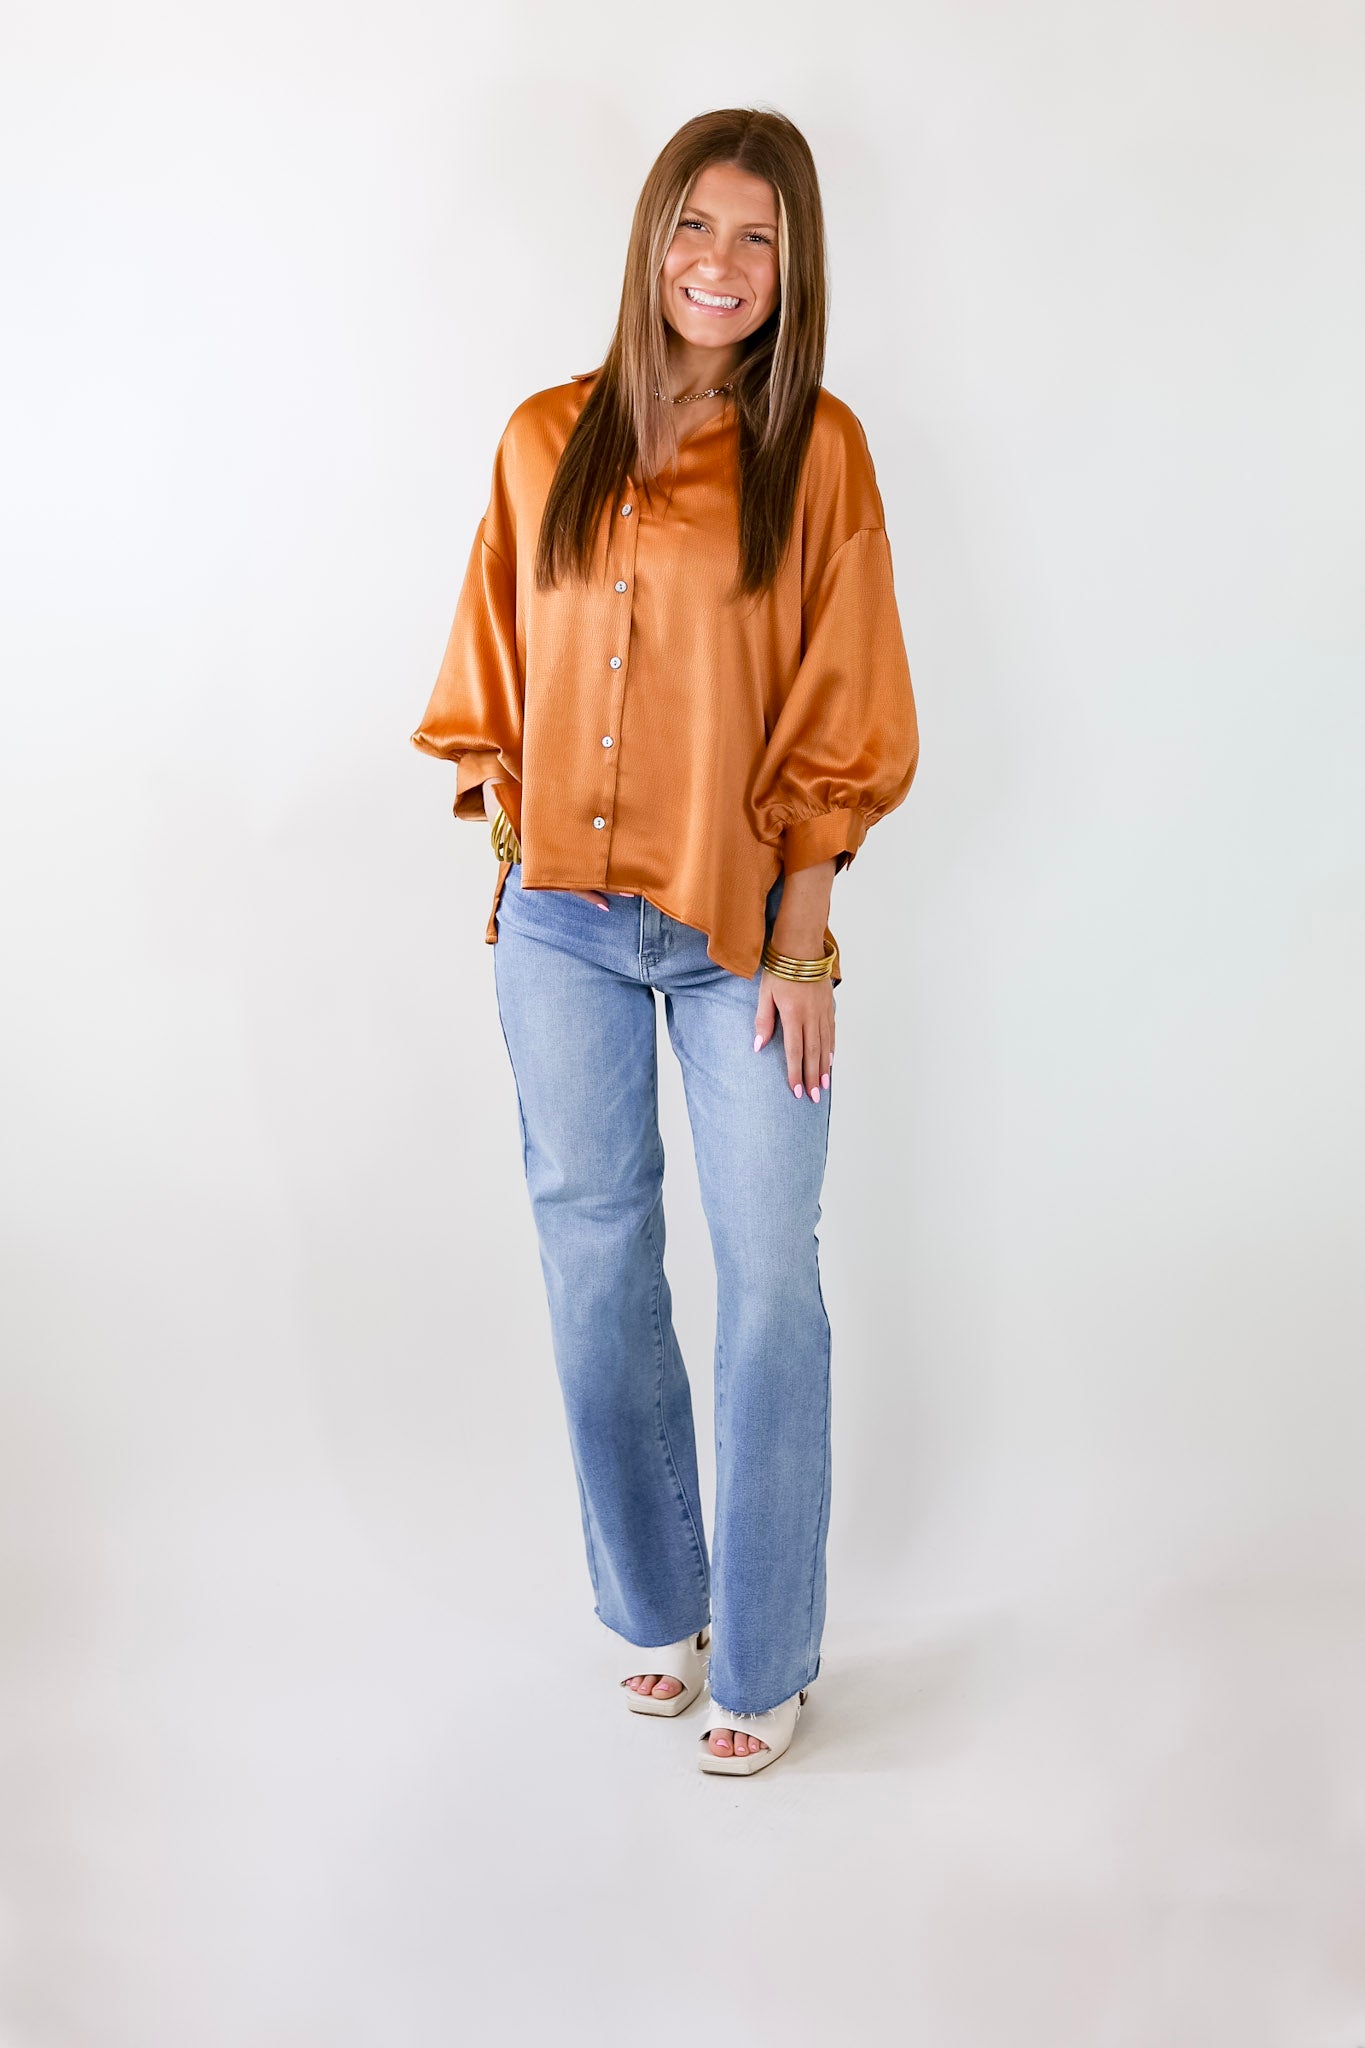 Sweet Notion Button Up 3/4 Balloon Sleeve Top in Pumpkin Orange - Giddy Up Glamour Boutique